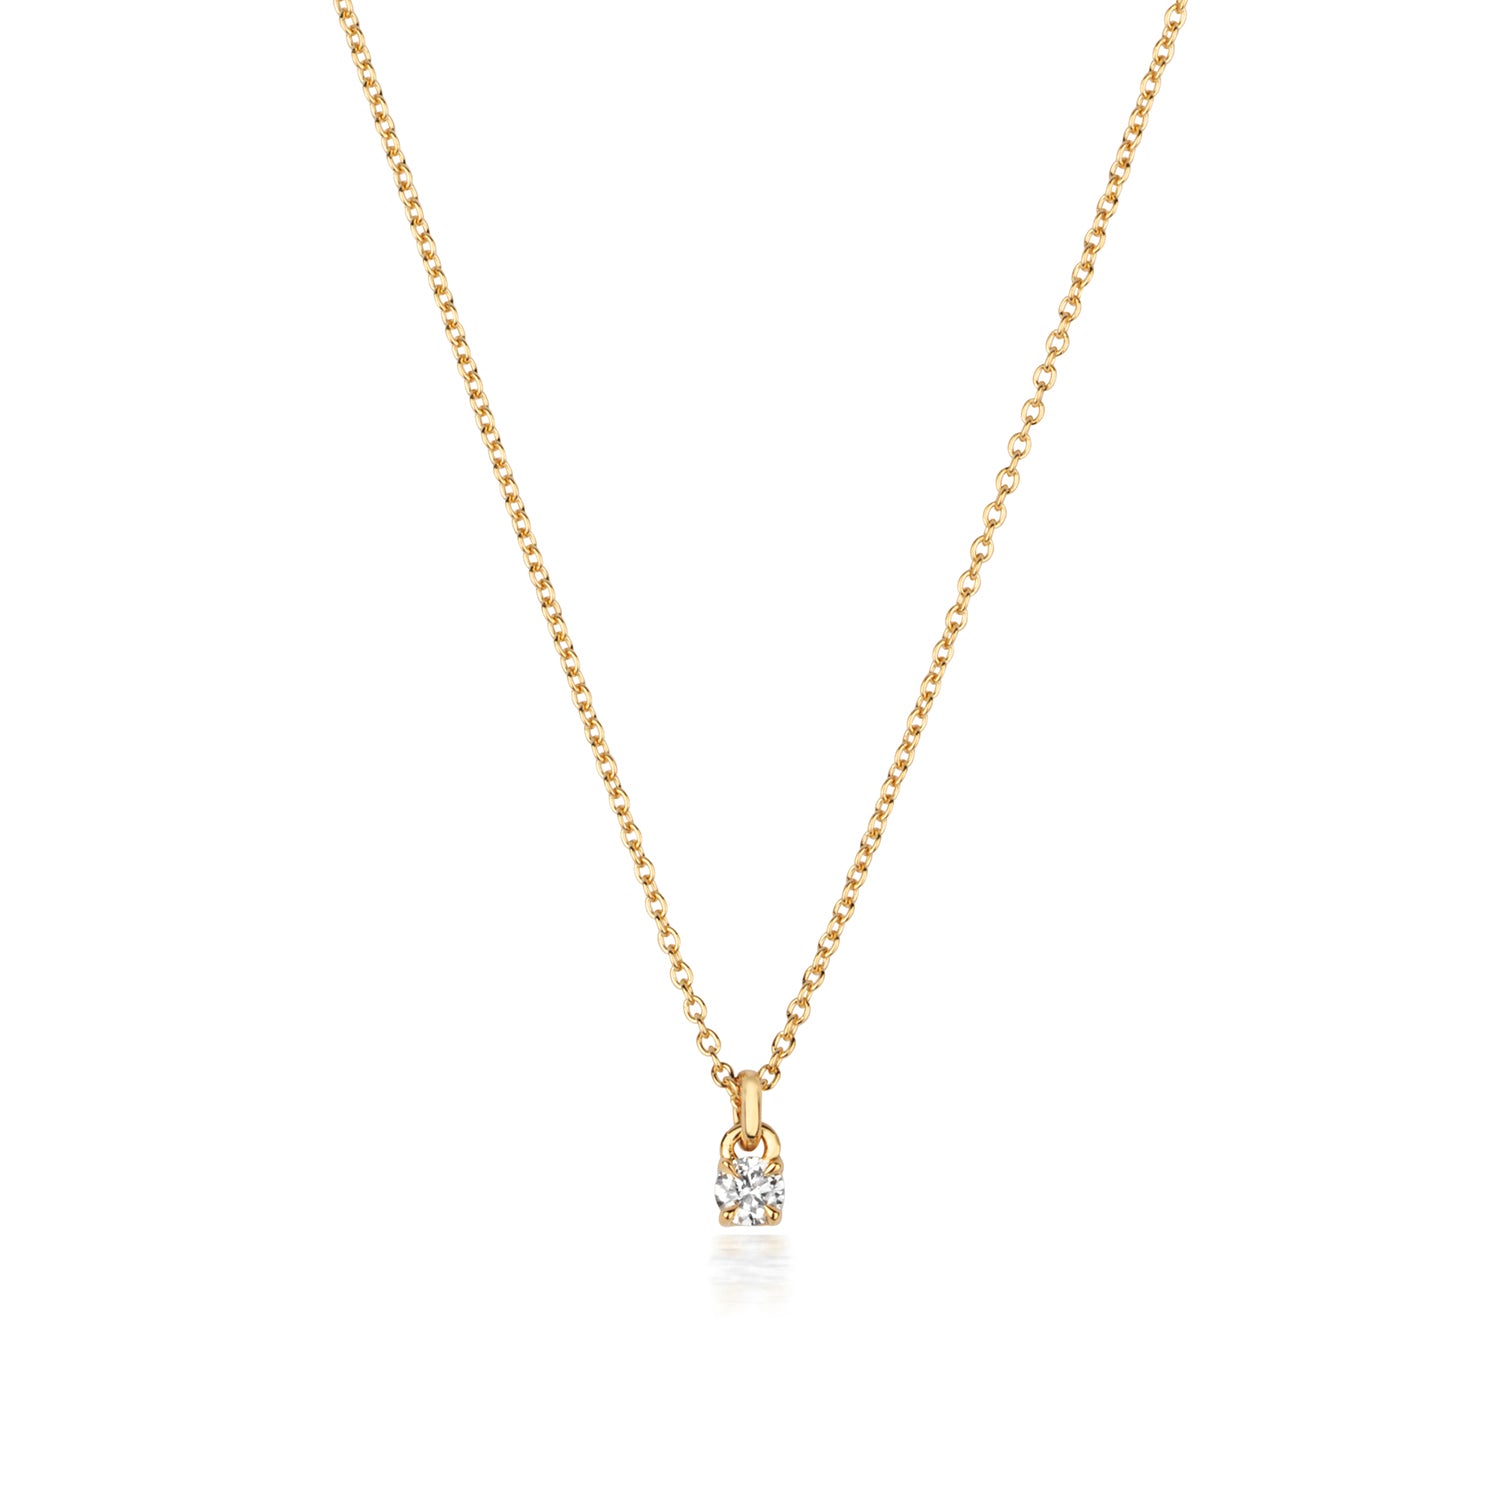 DIAMOND 4 CLAW NECKLACE IN 18 CT GOLD